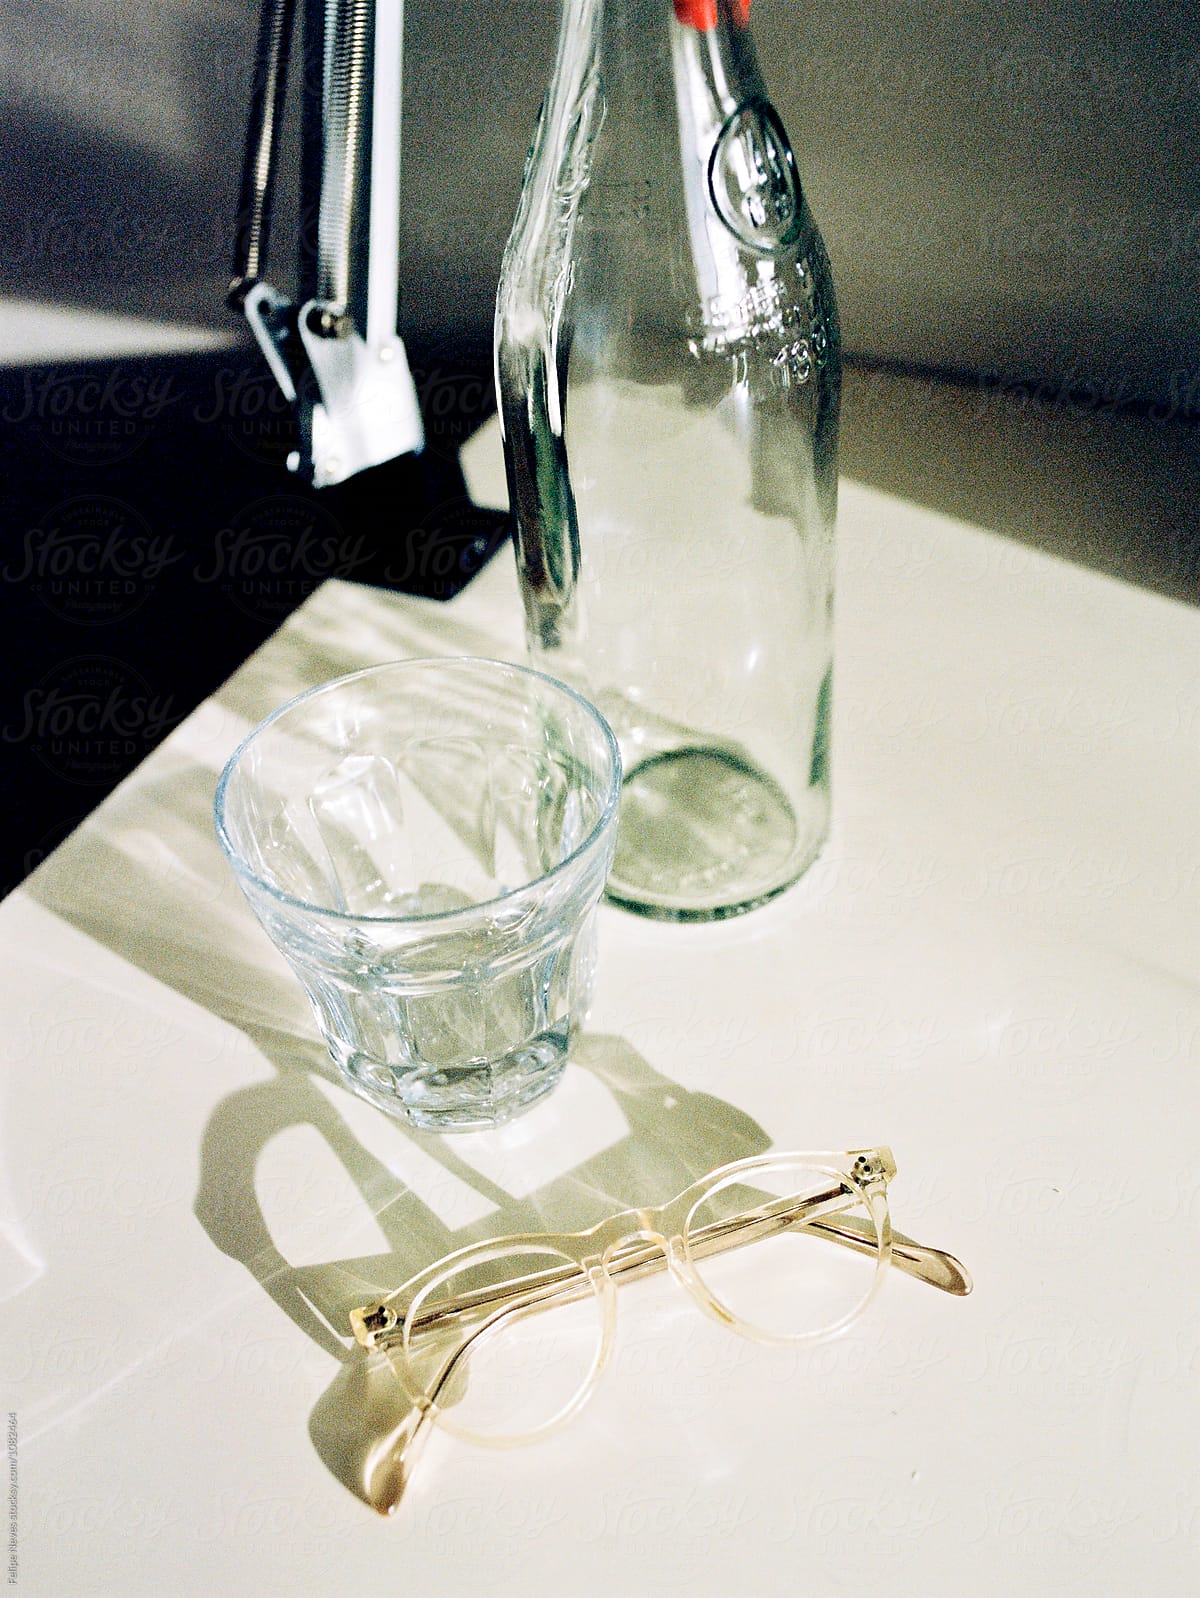 Glass water bottle, water glass and pair of prescription glasses on a table